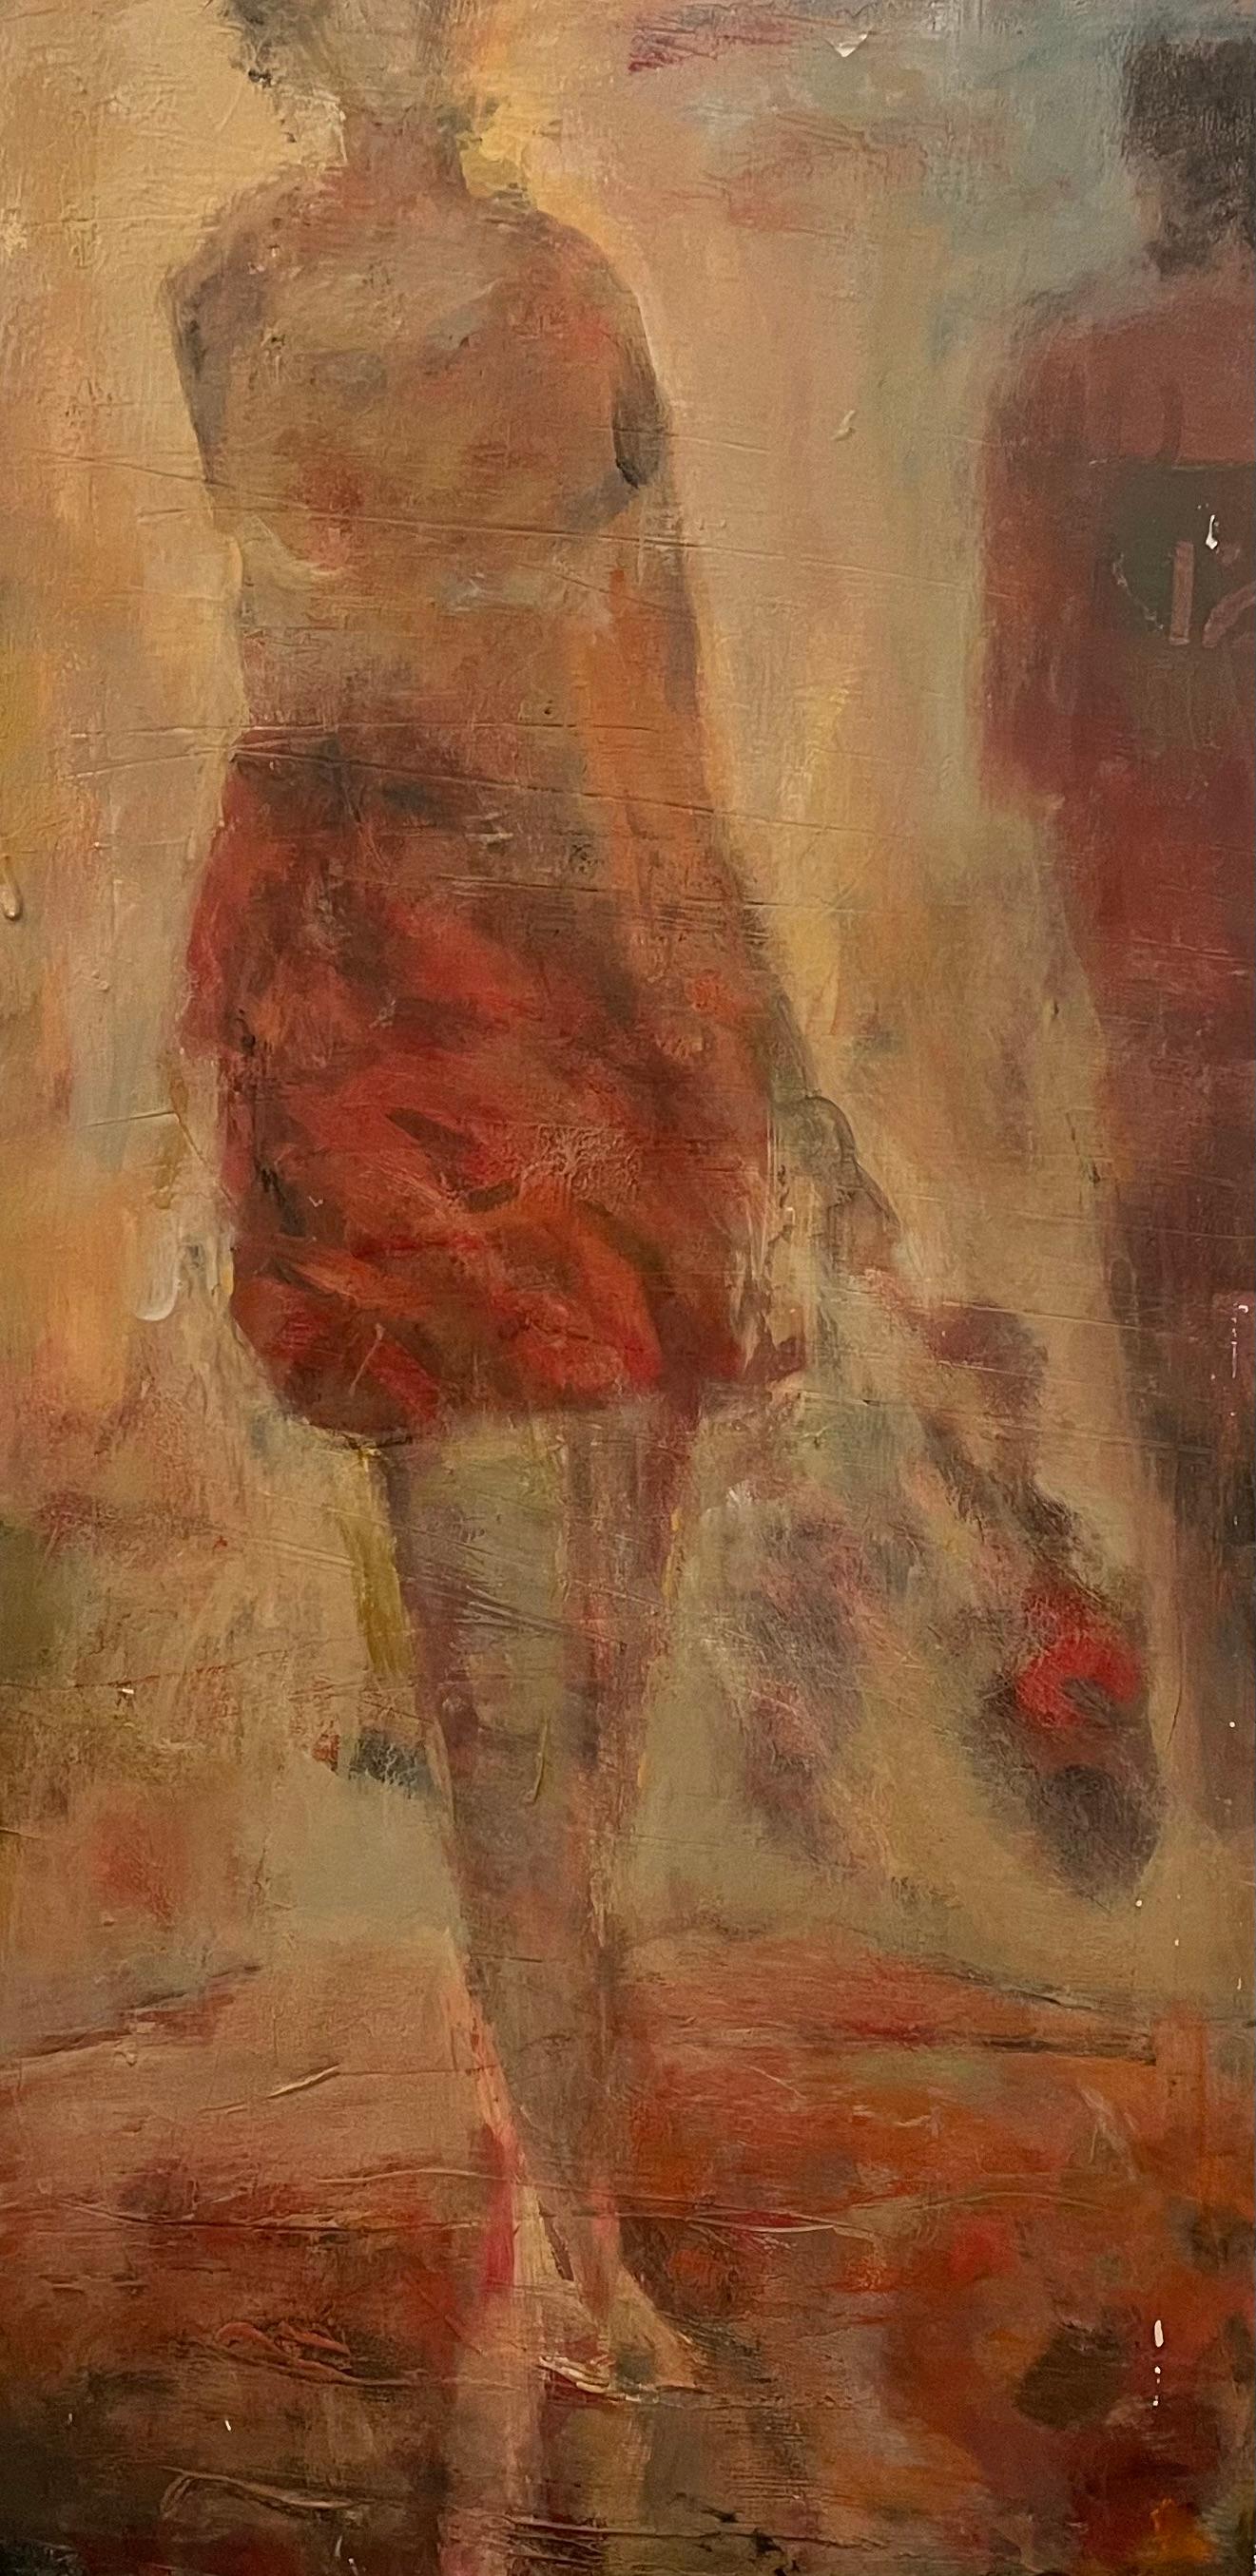 Figurative Painting Helen Steele - "In Passing" Contemporary Figurative Abstract Expressionist